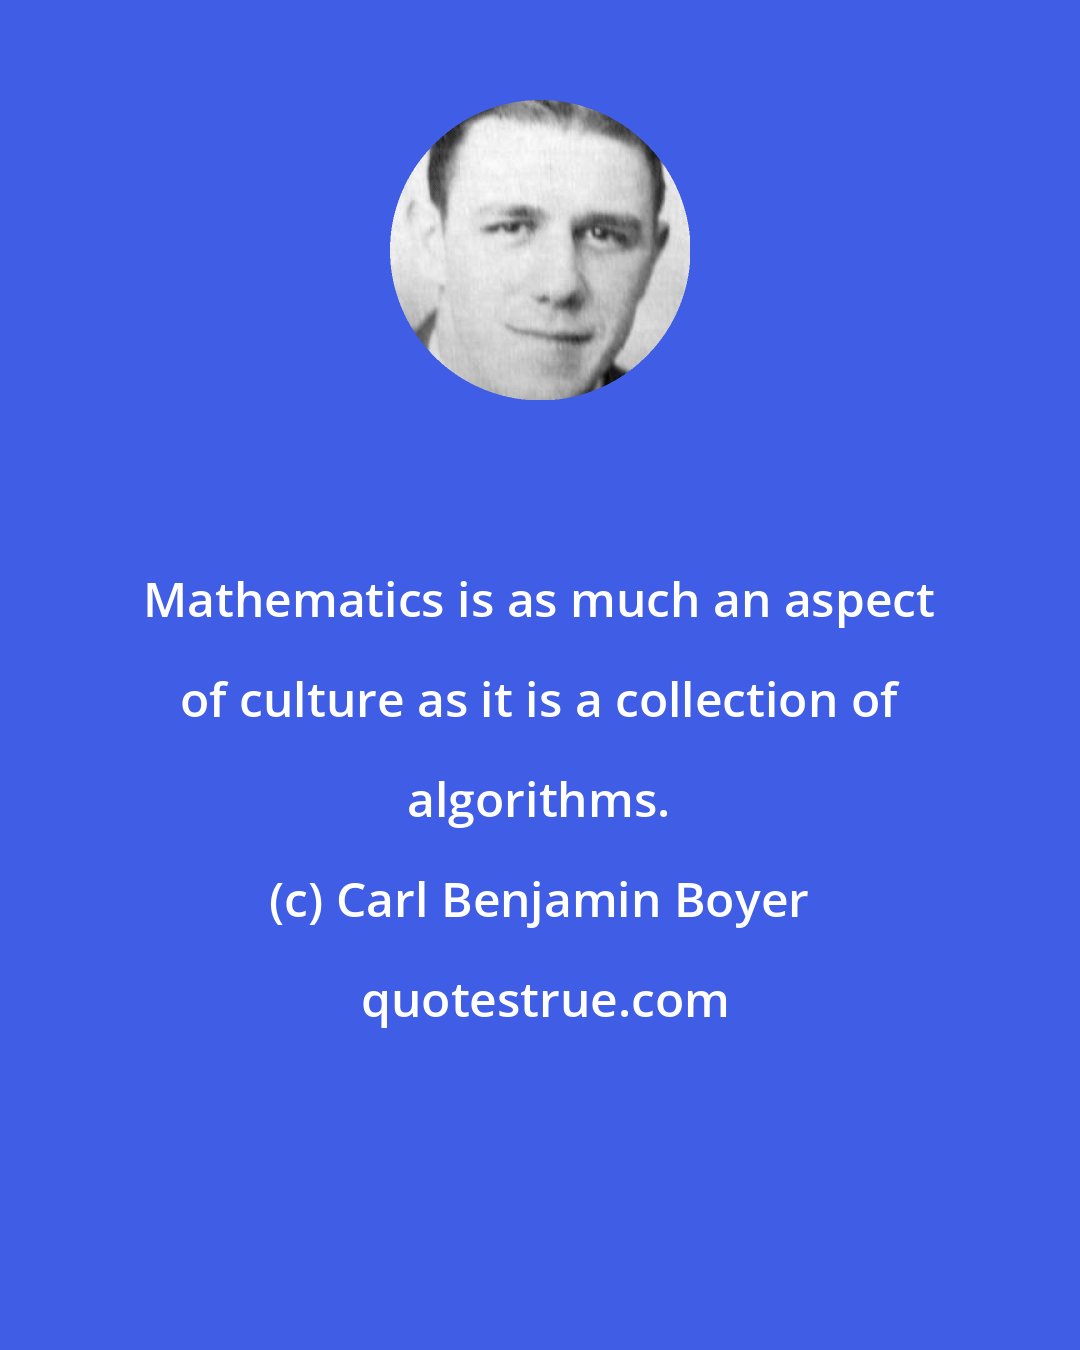 Carl Benjamin Boyer: Mathematics is as much an aspect of culture as it is a collection of algorithms.